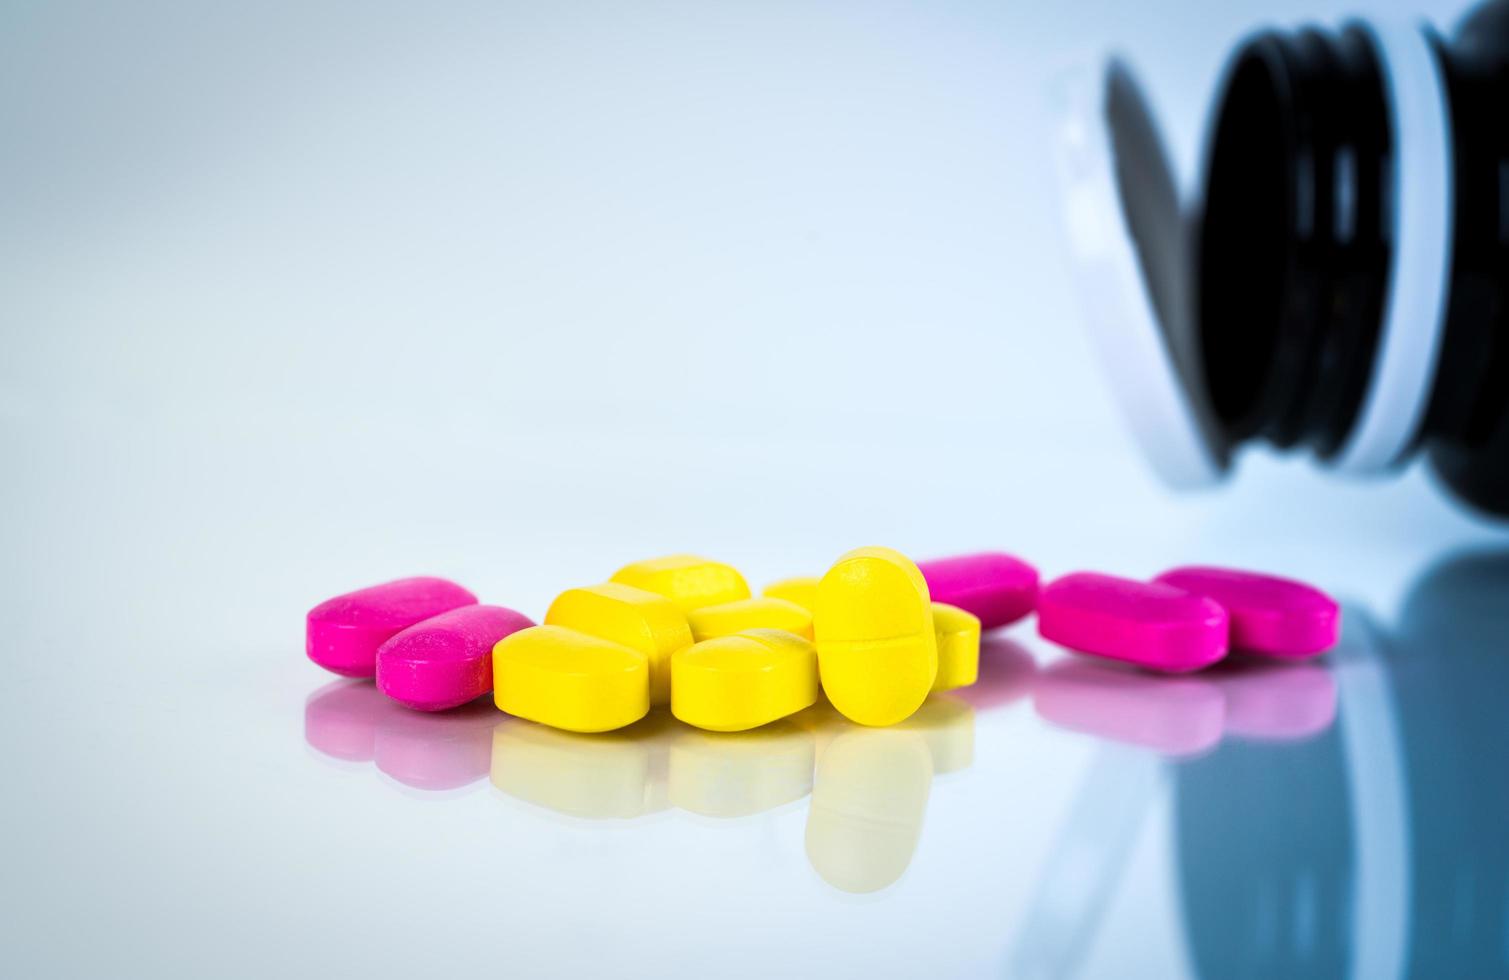 Yellow and pink oval tablet pills with shadows on white background with blurred pills bottle. Mild to moderate pain management. Pain killer medicine. Ibuprofen caplets pills. photo